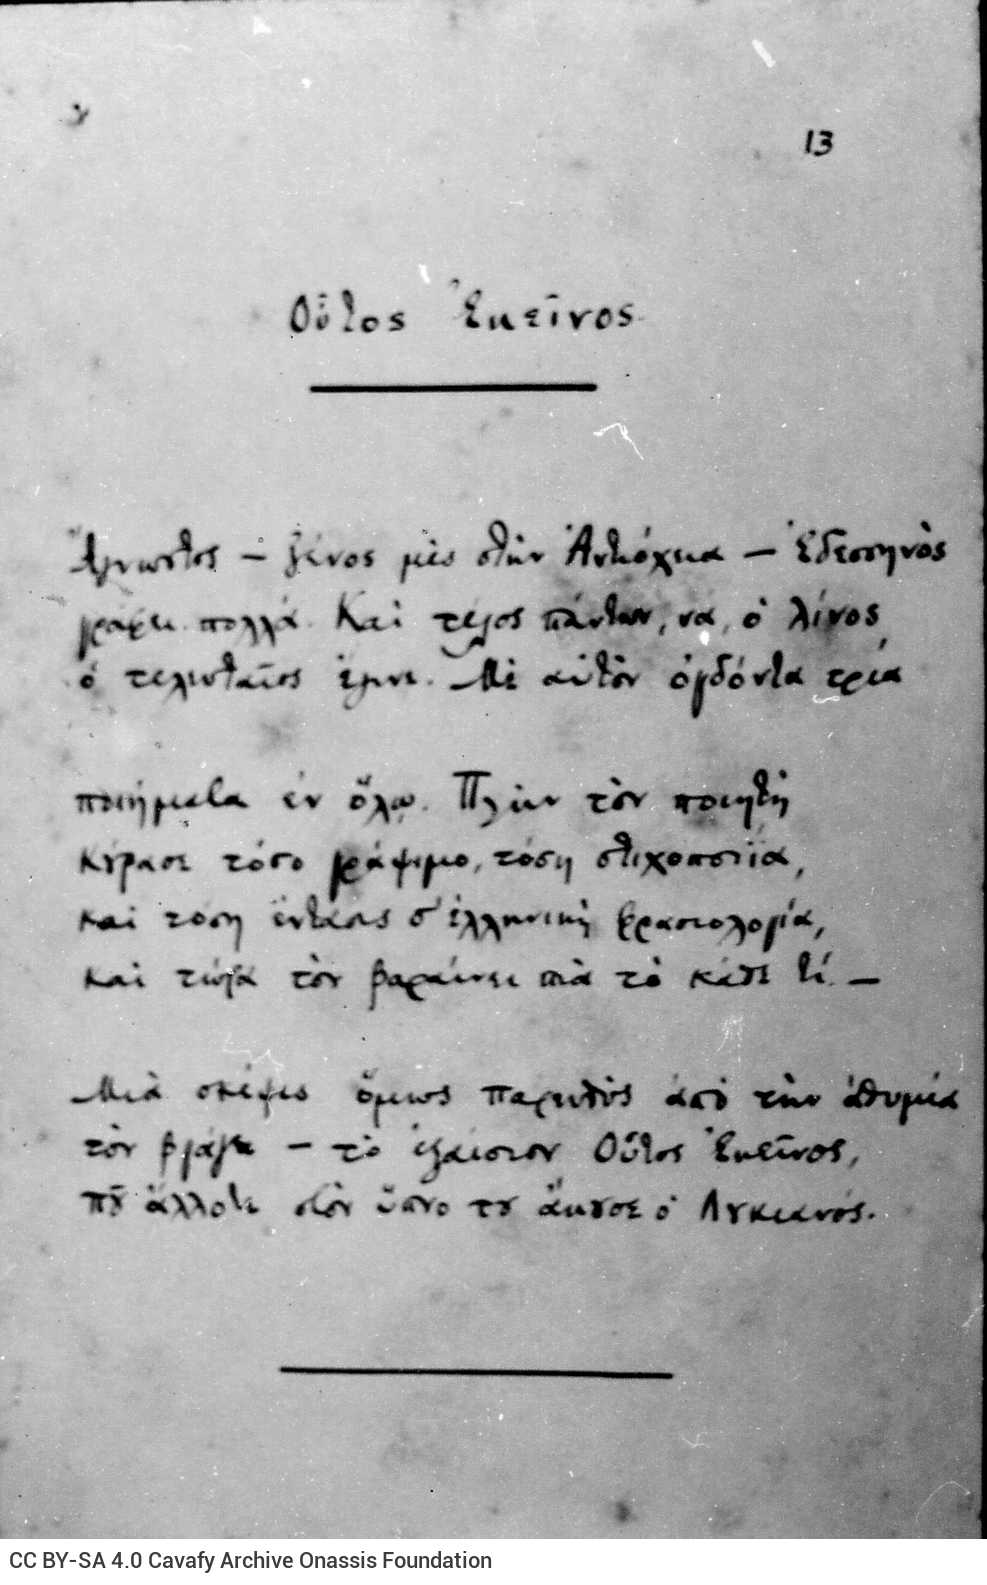 Manuscript of the poem "That Is He" on one side of a sheet. Blank verso. Number "13" at top right. The title has been unde